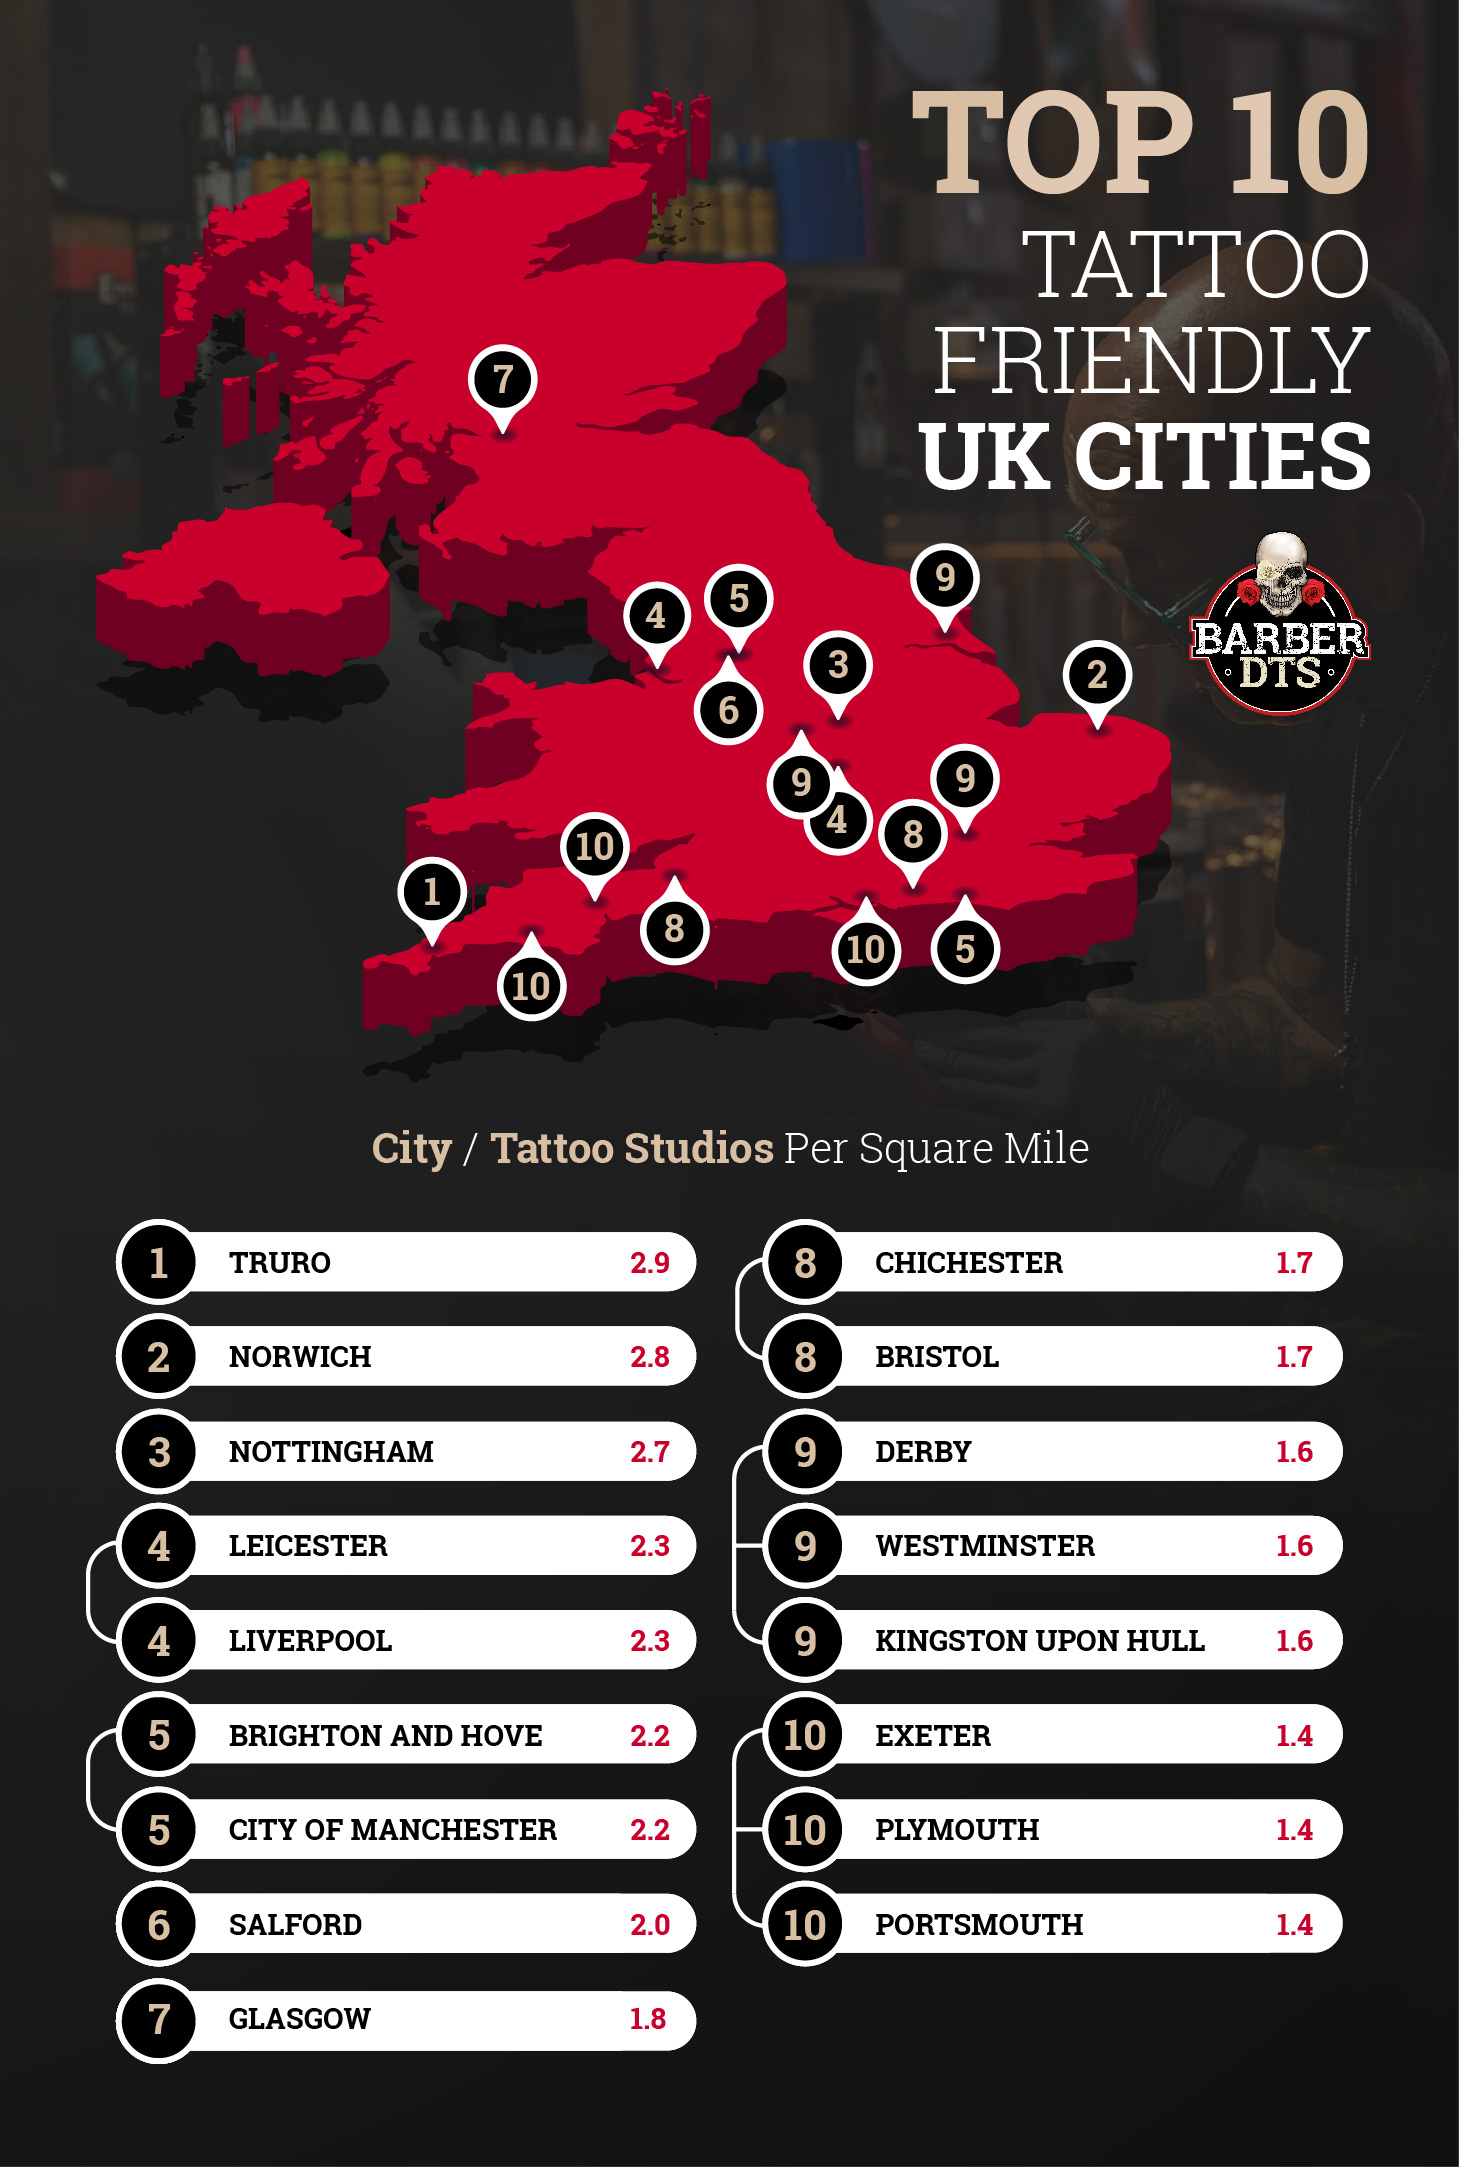 Top Tattoo Friendly Cities in the UK